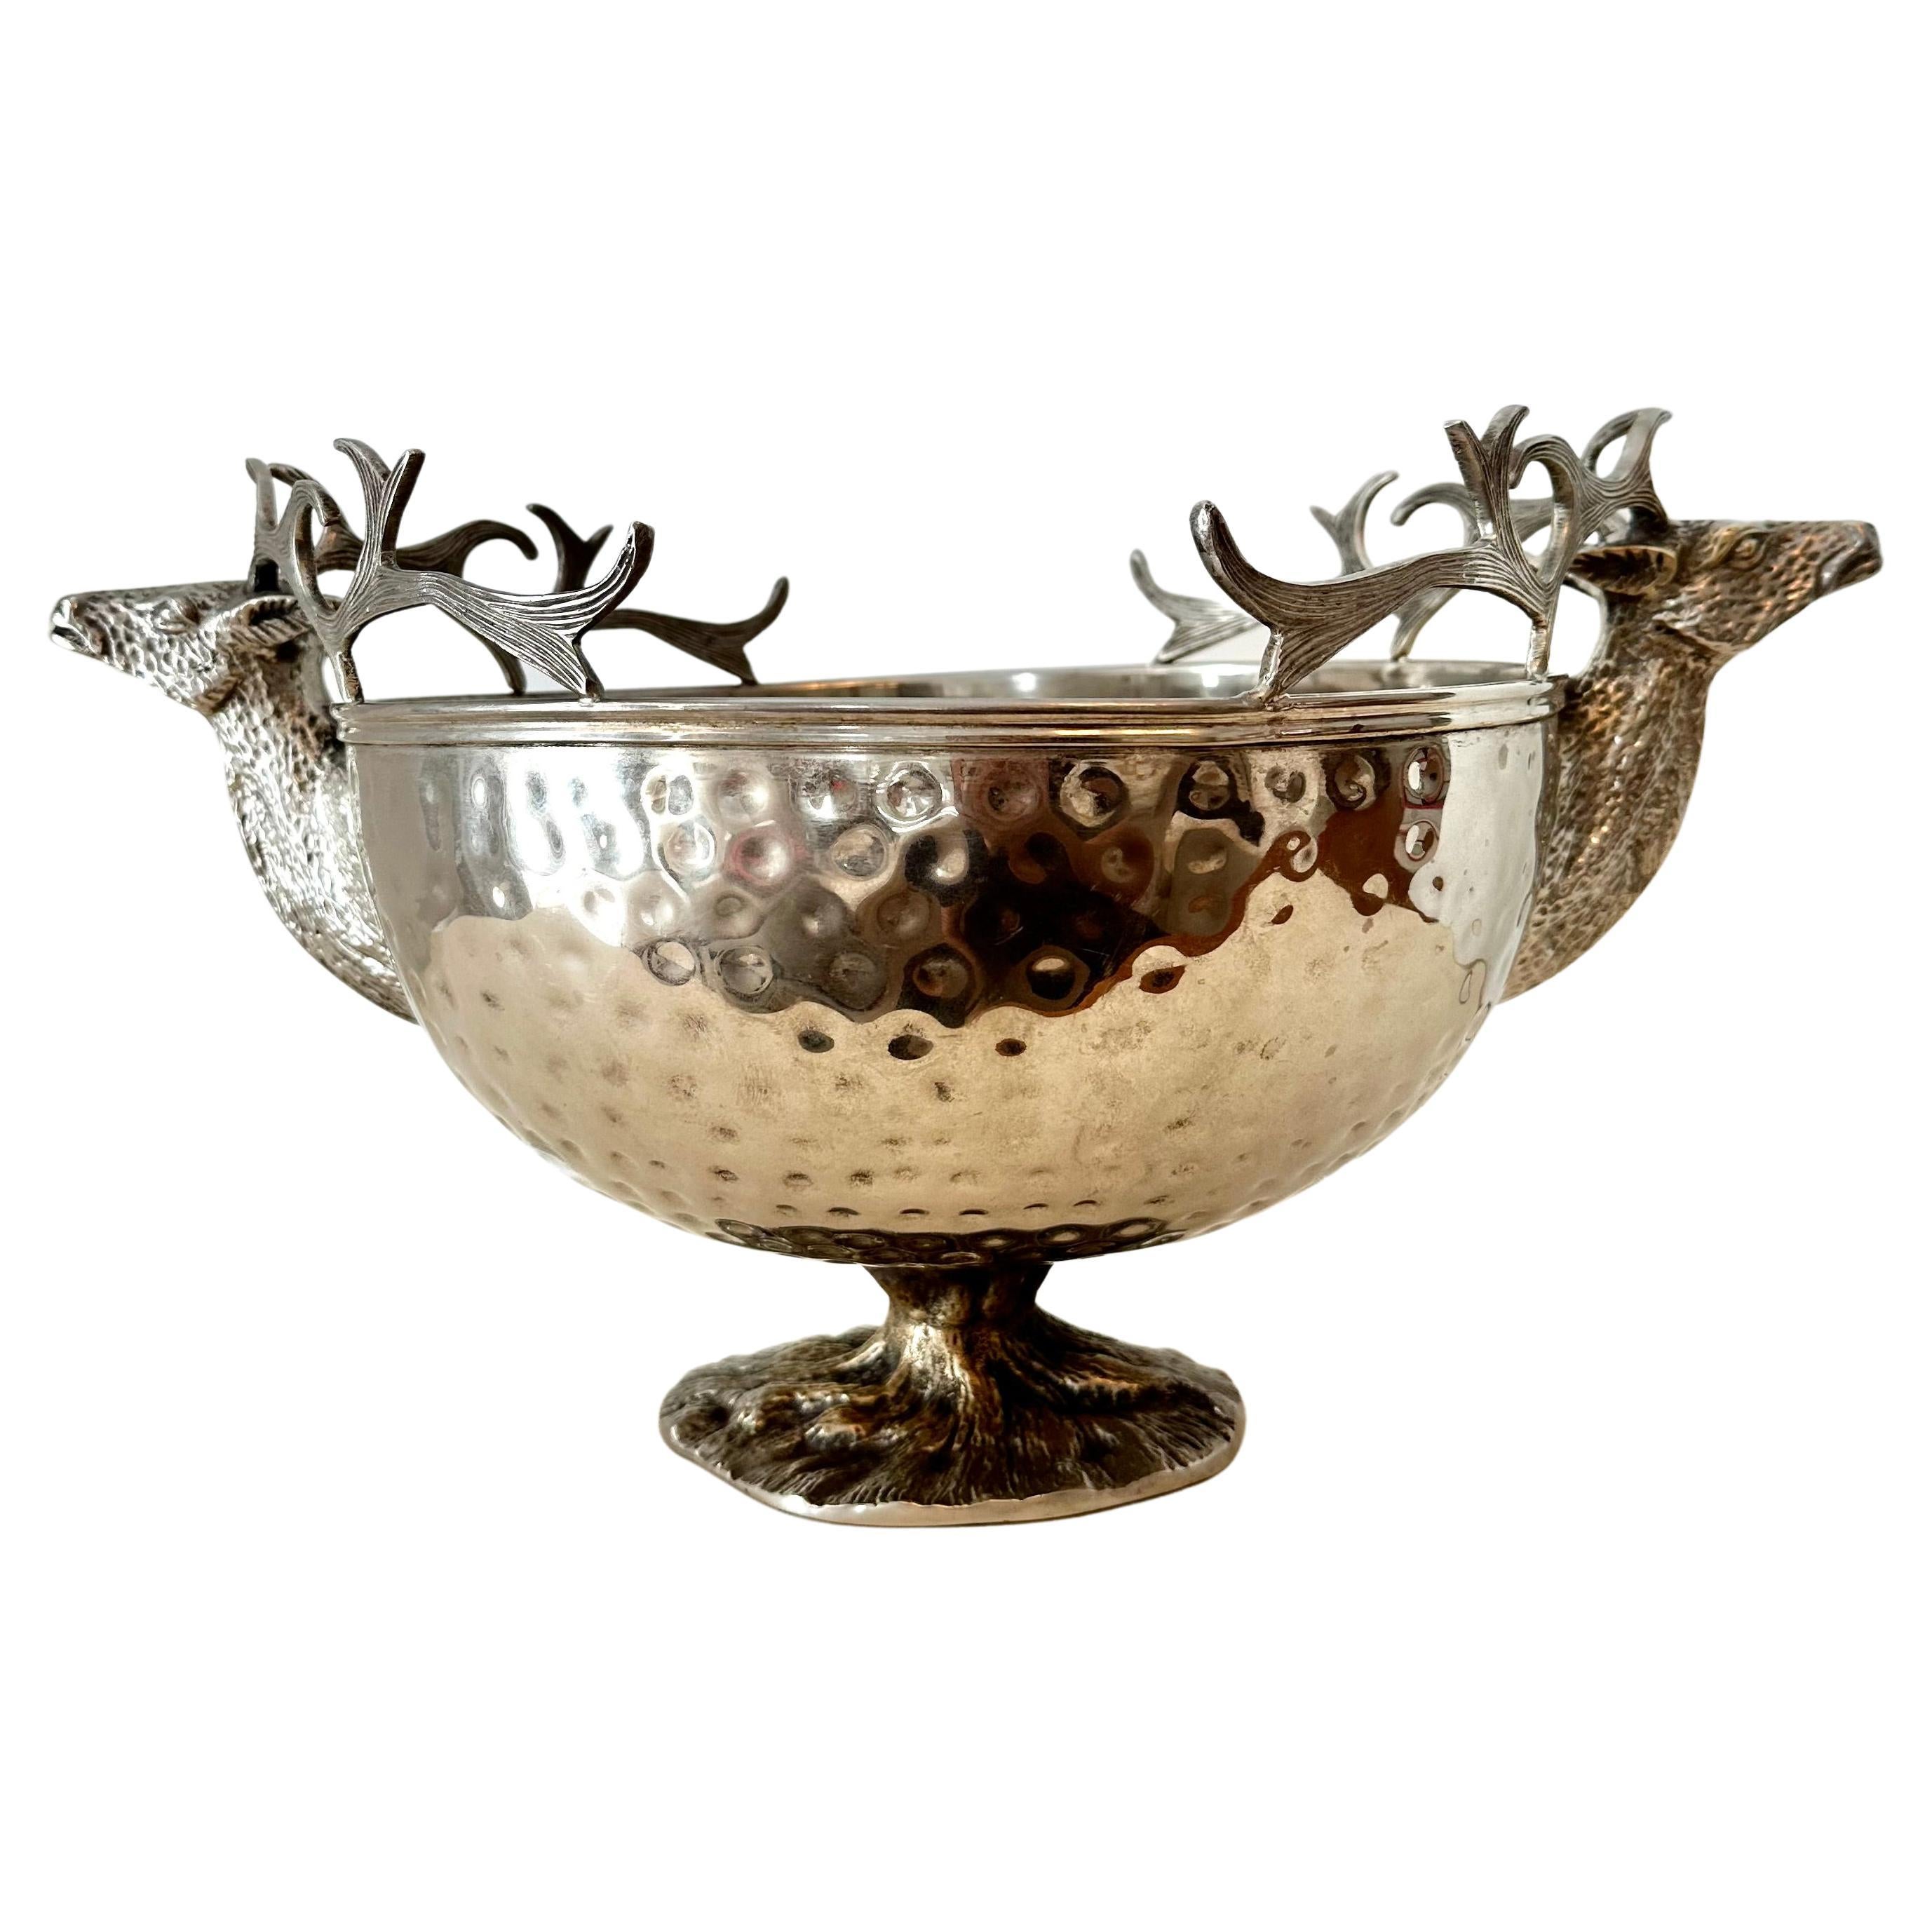 Hammered Silver Plate Footed Bowl with Steer Head Handles